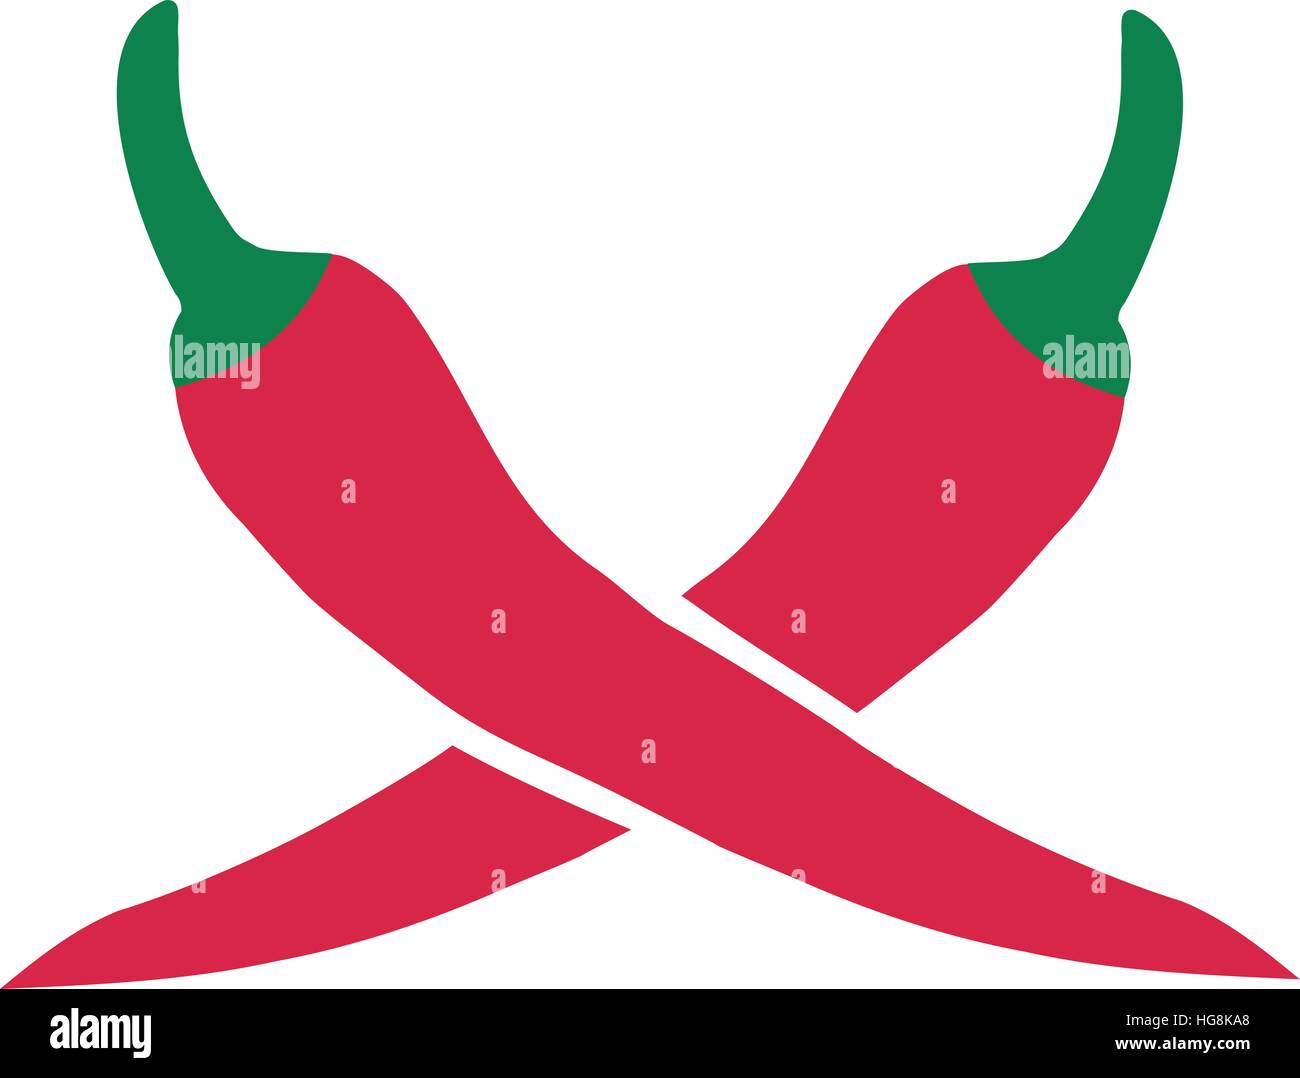 Chili peppers Stock Vector